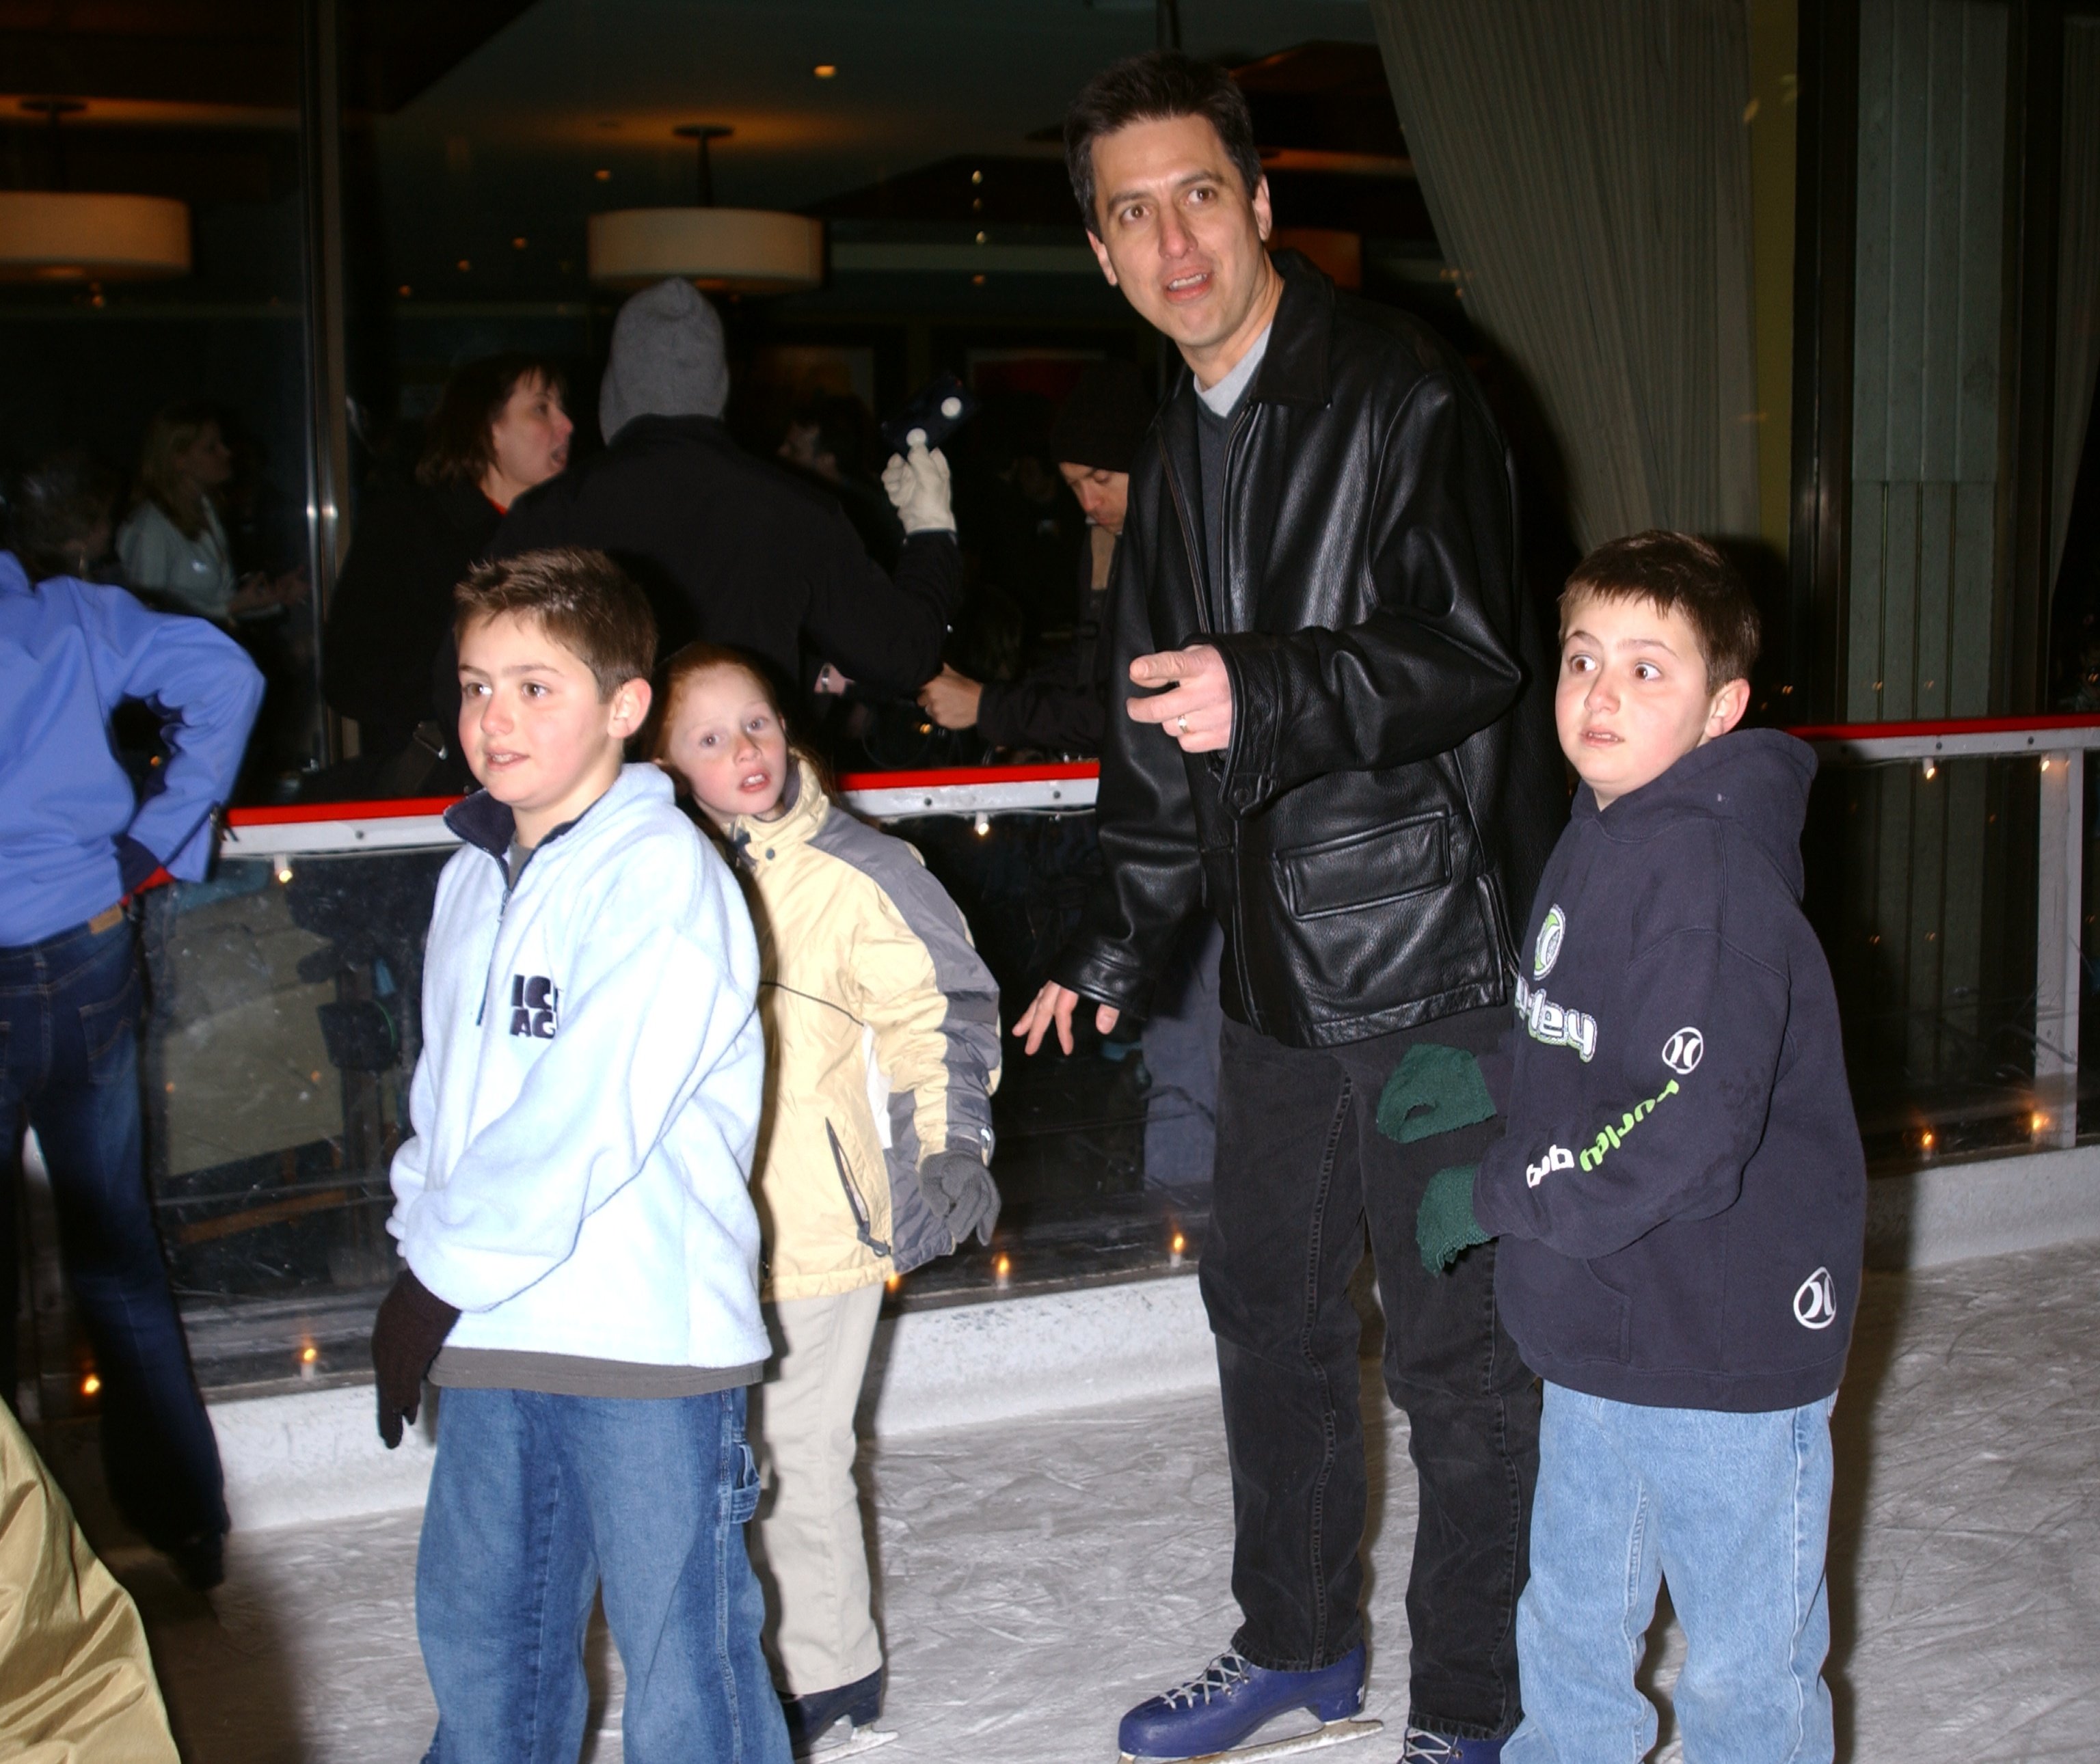 Ray Romano takes to the ice at Rockefeller Center rink with sons Matt and Gregory on January 1, 2002 | Source: Getty Images